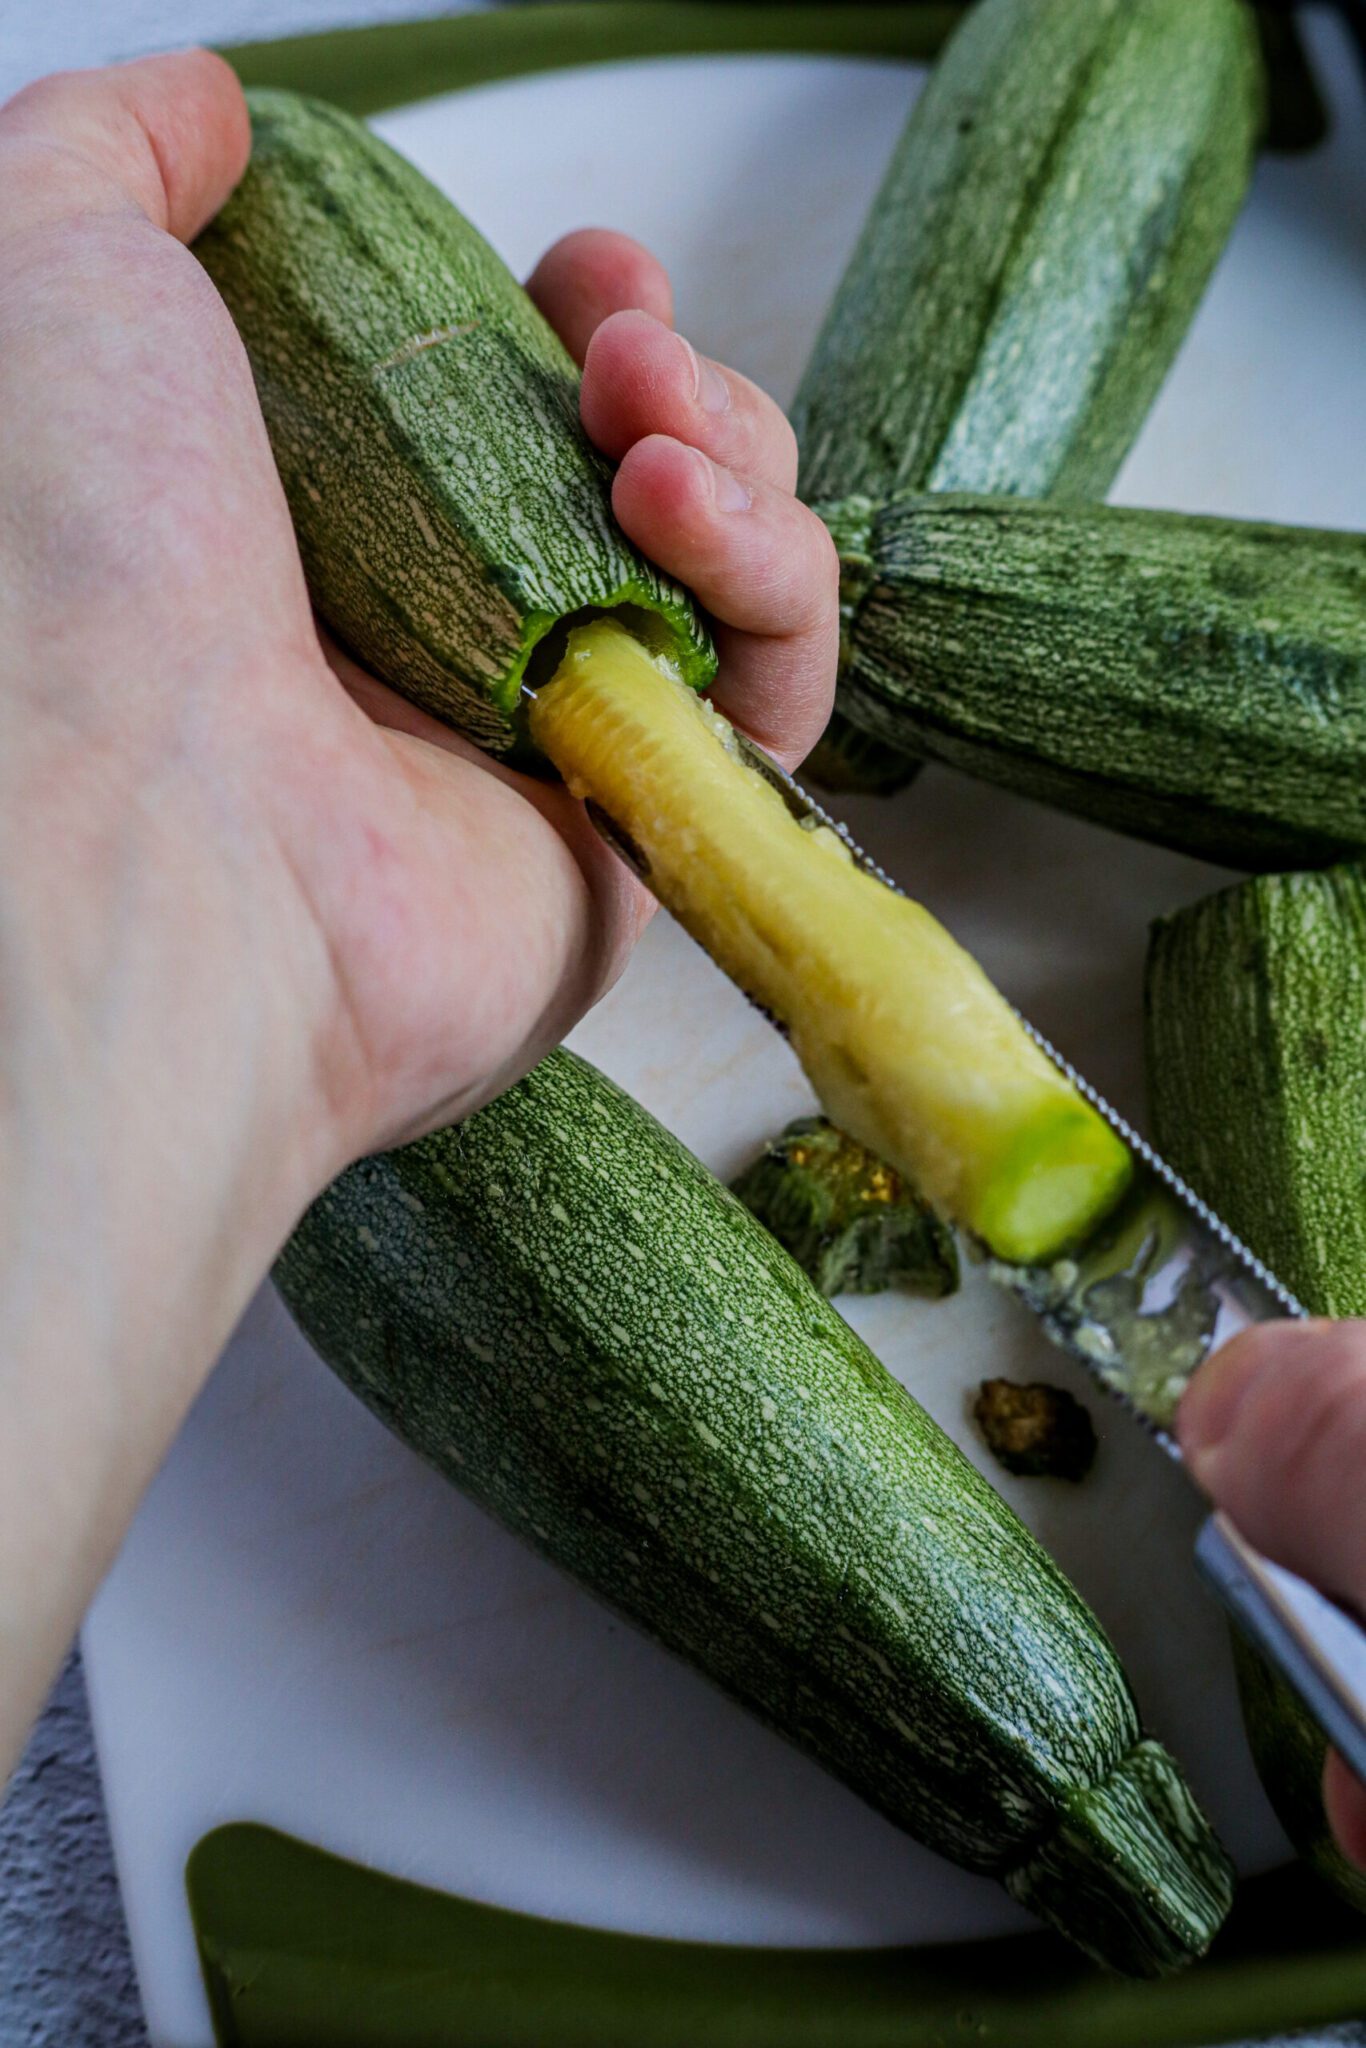 the flesh being removed from a mini zucchini